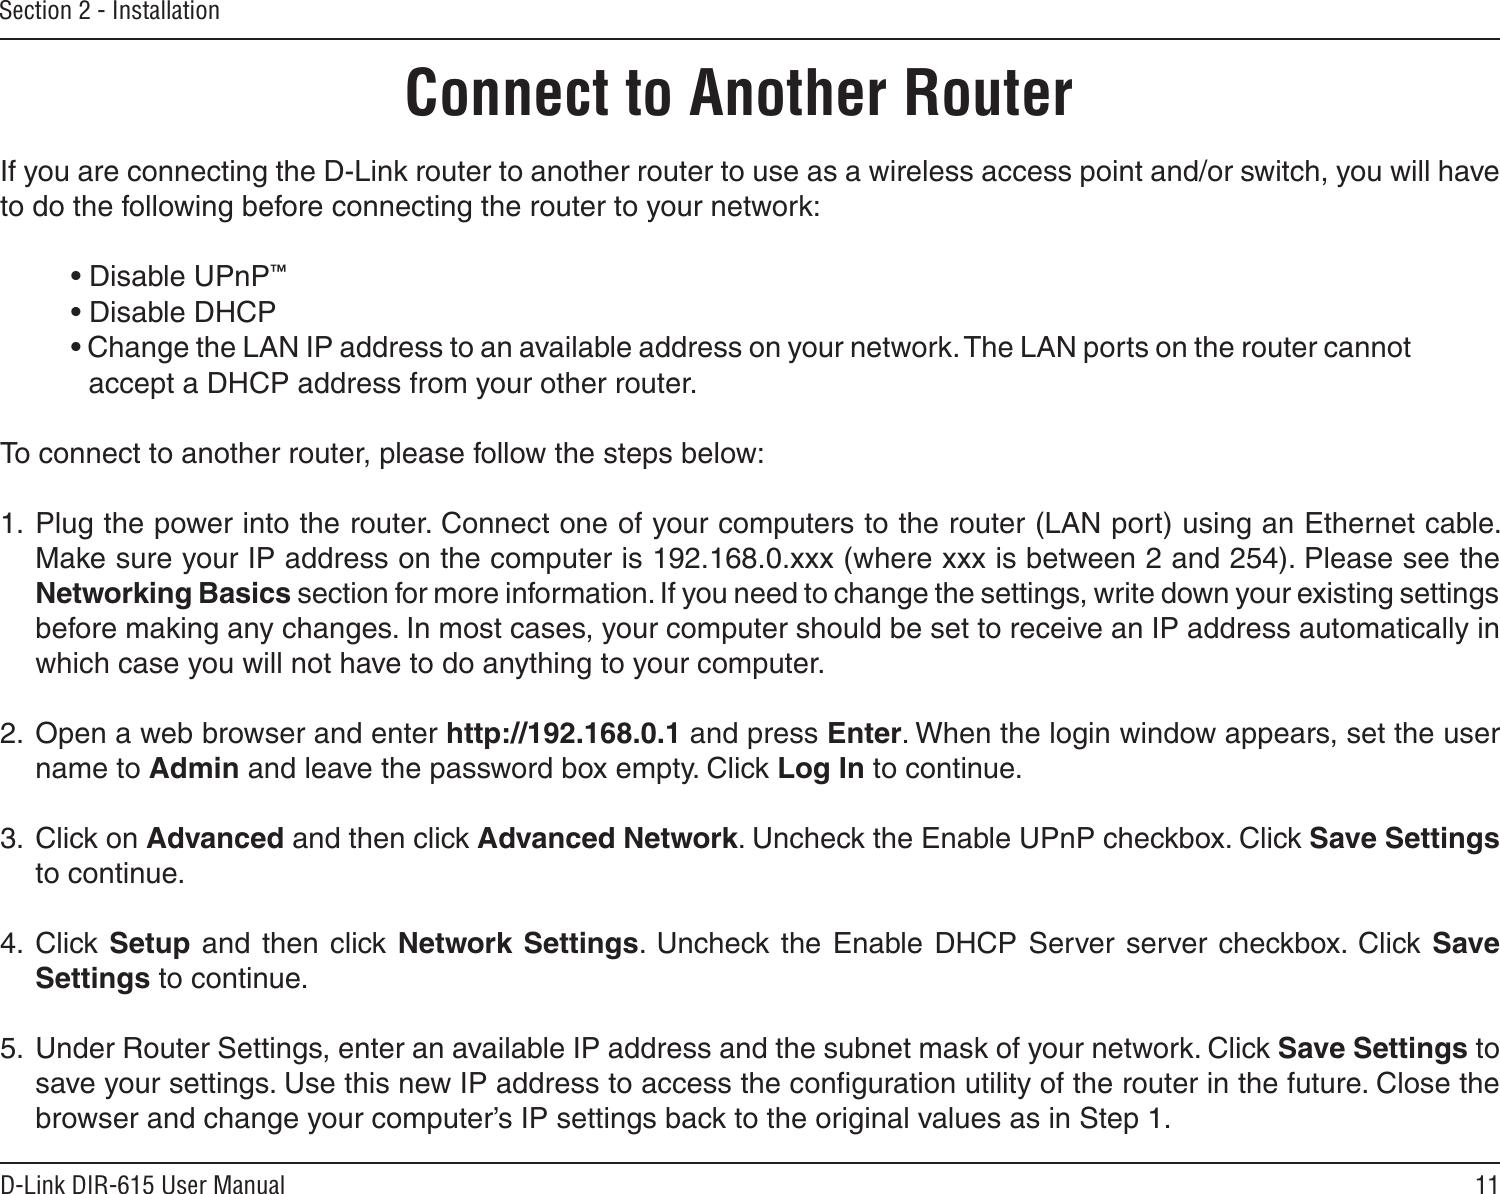 11D-Link DIR-615 User ManualSection 2 - InstallationIf you are connecting the D-Link router to another router to use as a wireless access point and/or switch, you will have to do the following before connecting the router to your network:• Disable UPnP™• Disable DHCP• Change the LAN IP address to an available address on your network. The LAN ports on the router cannot accept a DHCP address from your other router.To connect to another router, please follow the steps below:1.  Plug the power into the router. Connect one of your computers to the router (LAN port) using an Ethernet cable. Make sure your IP address on the computer is 192.168.0.xxx (where xxx is between 2 and 254). Please see the Networking Basics section for more information. If you need to change the settings, write down your existing settings before making any changes. In most cases, your computer should be set to receive an IP address automatically in which case you will not have to do anything to your computer.2.  Open a web browser and enter http://192.168.0.1 and press Enter. When the login window appears, set the user name to Admin and leave the password box empty. Click Log In to continue.3.  Click on Advanced and then click Advanced Network. Uncheck the Enable UPnP checkbox. Click Save Settings to continue. 4.  Click Setup and then click  Network Settings.  Uncheck the Enable  DHCP  Server server checkbox.  Click Save Settings to continue.5.  Under Router Settings, enter an available IP address and the subnet mask of your network. Click Save Settings to save your settings. Use this new IP address to access the conﬁguration utility of the router in the future. Close the browser and change your computer’s IP settings back to the original values as in Step 1.Connect to Another Router